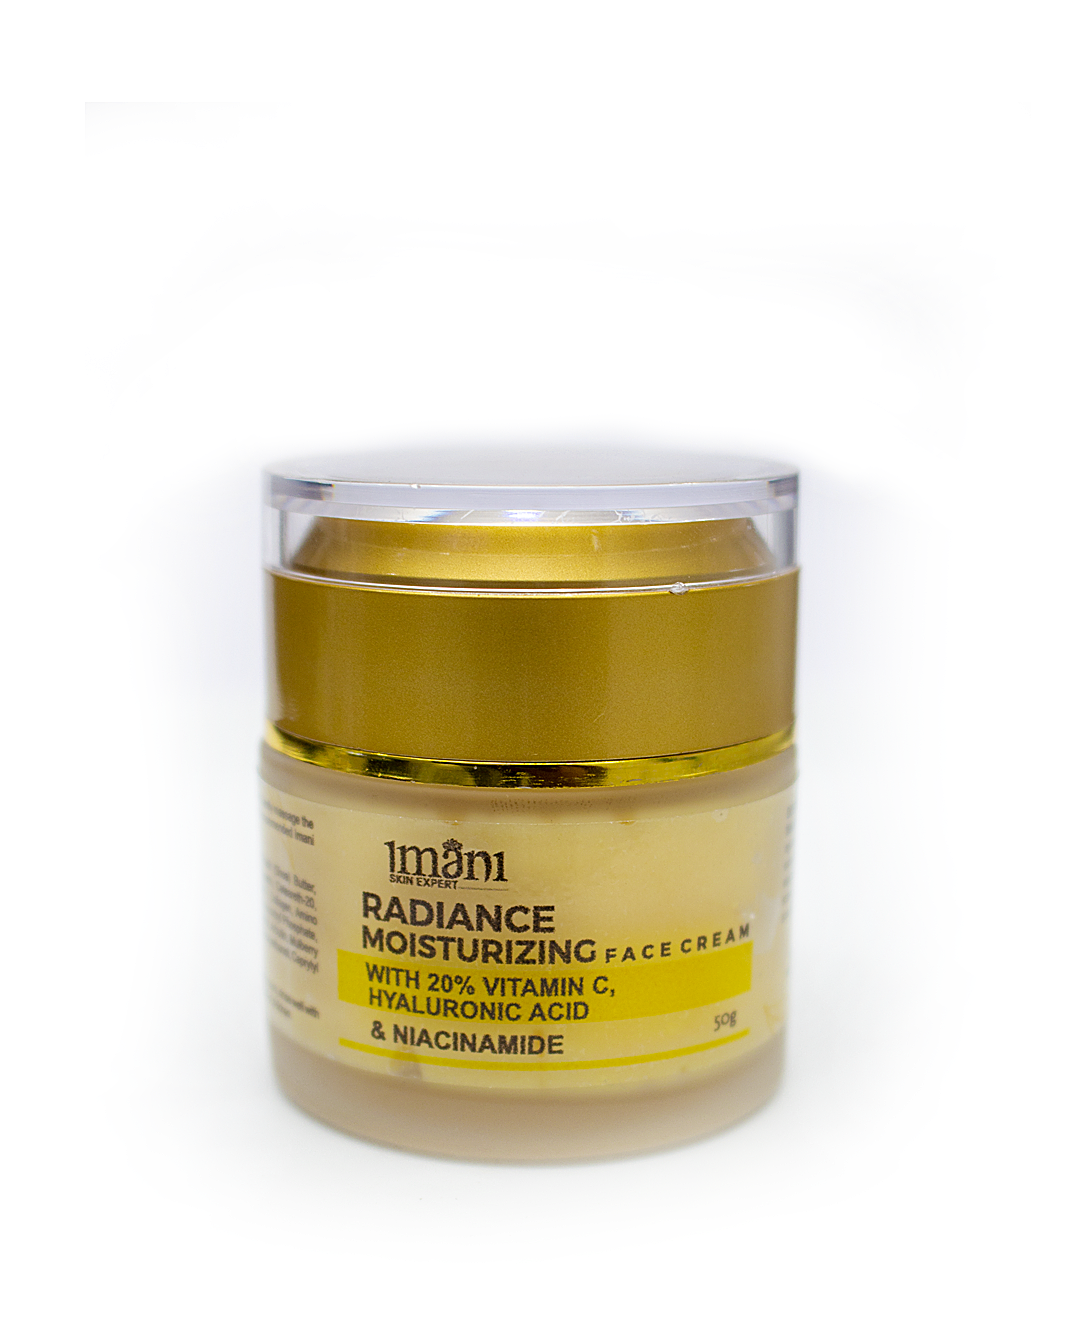 Buy Radiance Moisturizing Face Cream Online. Enjoy safe shopping online with our ecommerce. ✓ Best Price in Nigeria ✓ Fast Delivery & Express delivery Available. Also available at the Lagos and Abuja offices of Imani Aesthetic and Laser Clinic